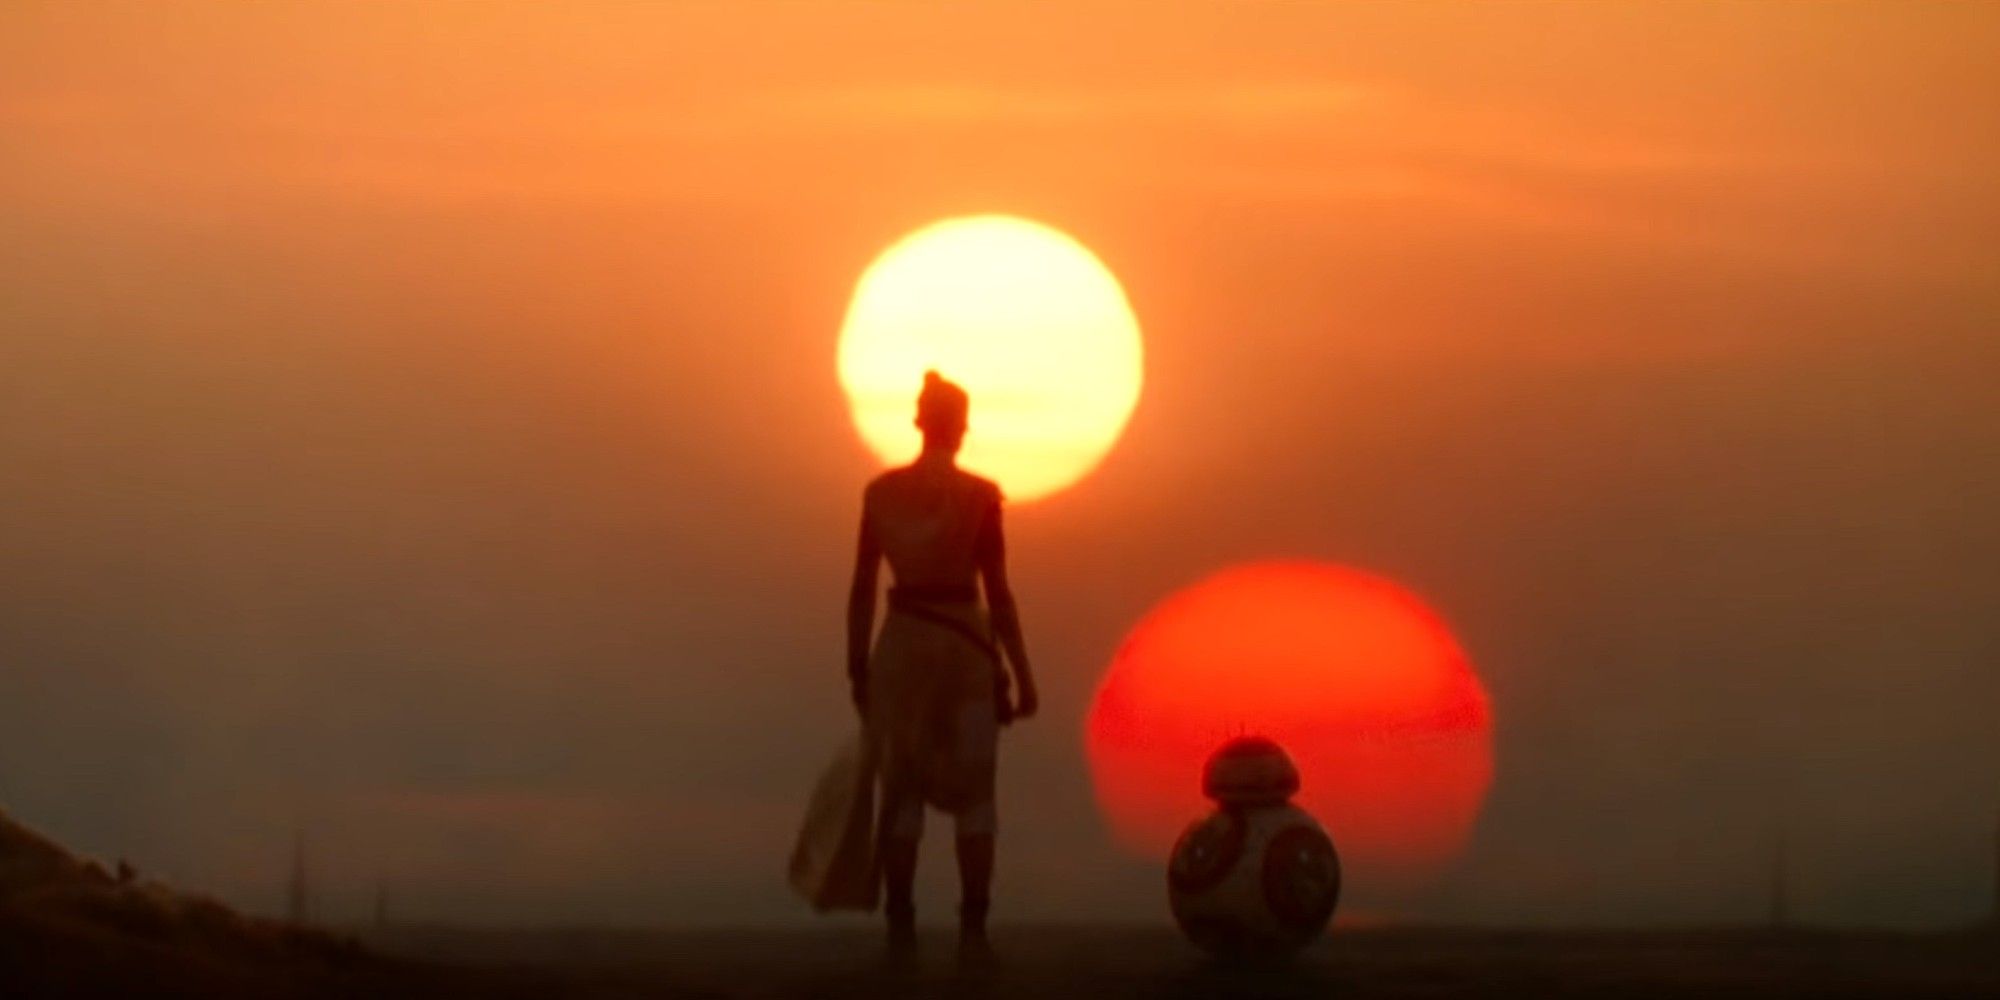 Rey BB-8 walk out into the Binary Sunset on Tatooine Star Wars 9 Rise of Skywalker Sunset Tatooine